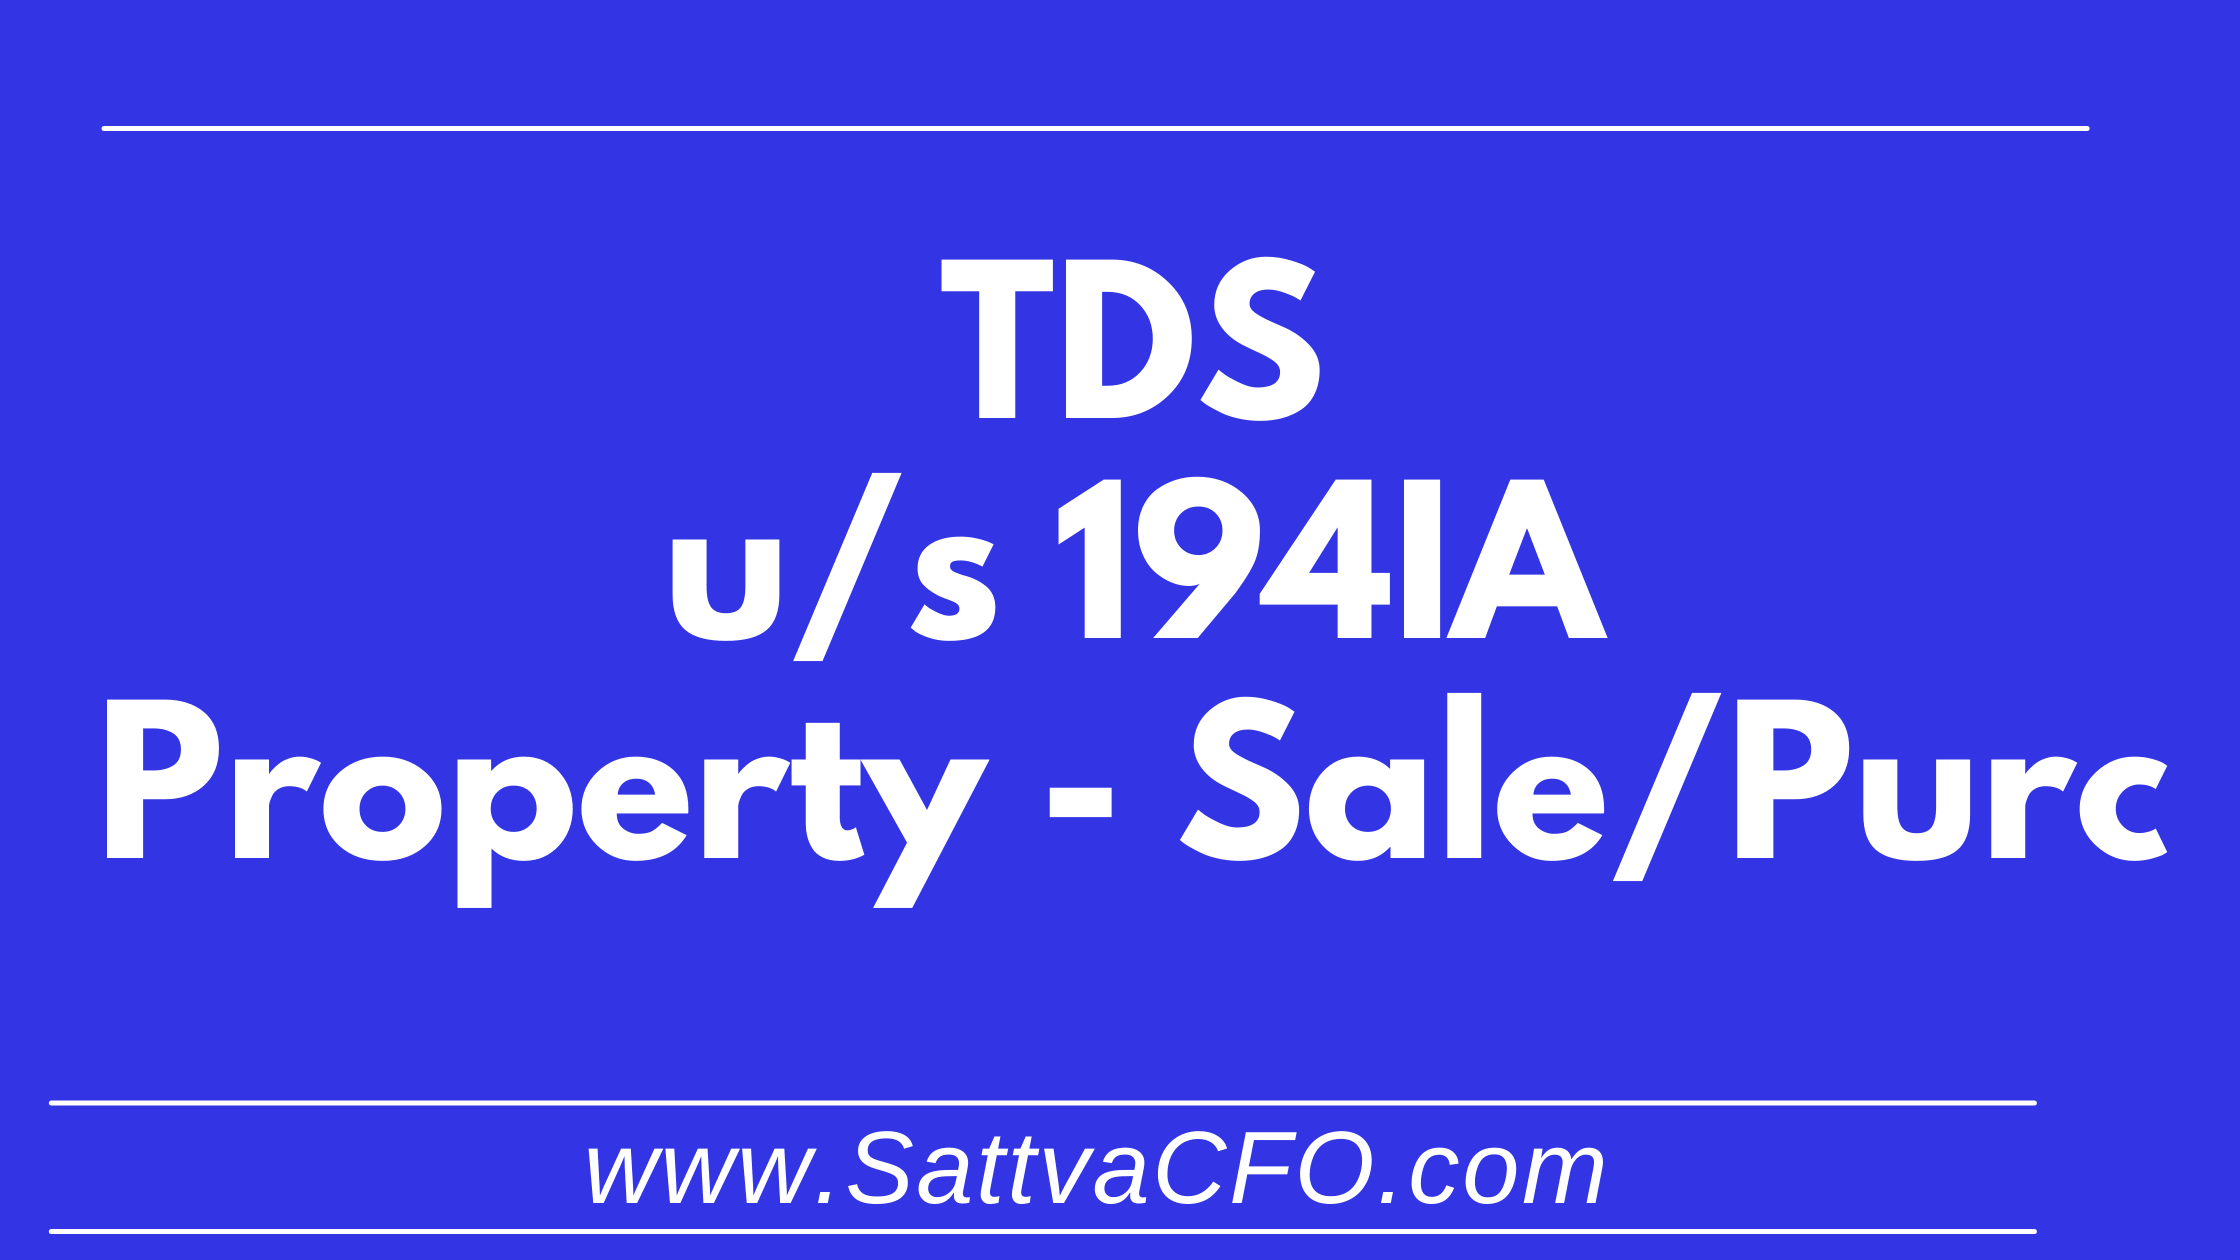 Section 194IA - TDS on Purchase or Sale of Property